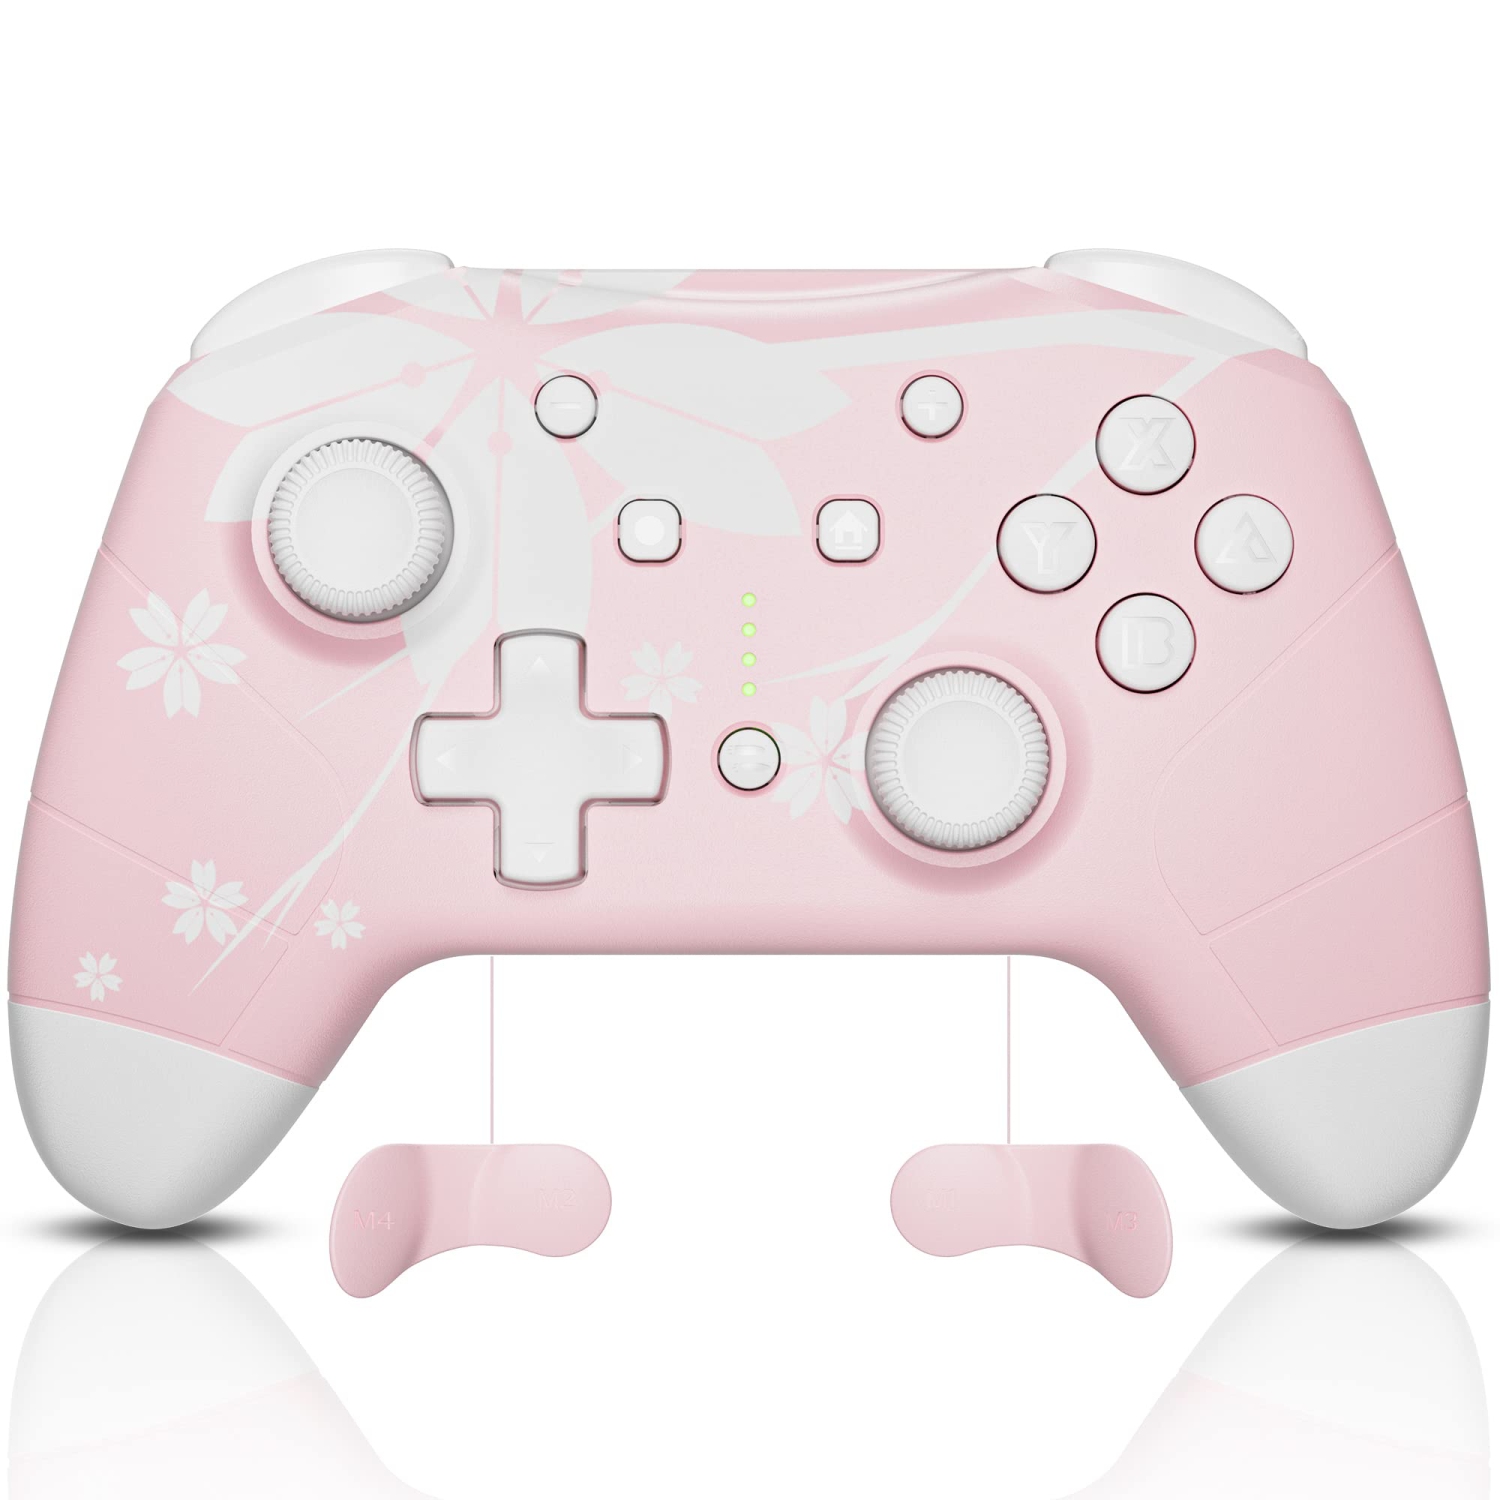 Sakura Pink Wireless Switch Pro Controller Compatible with Programmable Back Buttons/Headphone Jack/Turbo/Motion/Vibration for Switch/OLED/Lite, Steam Deck, PC